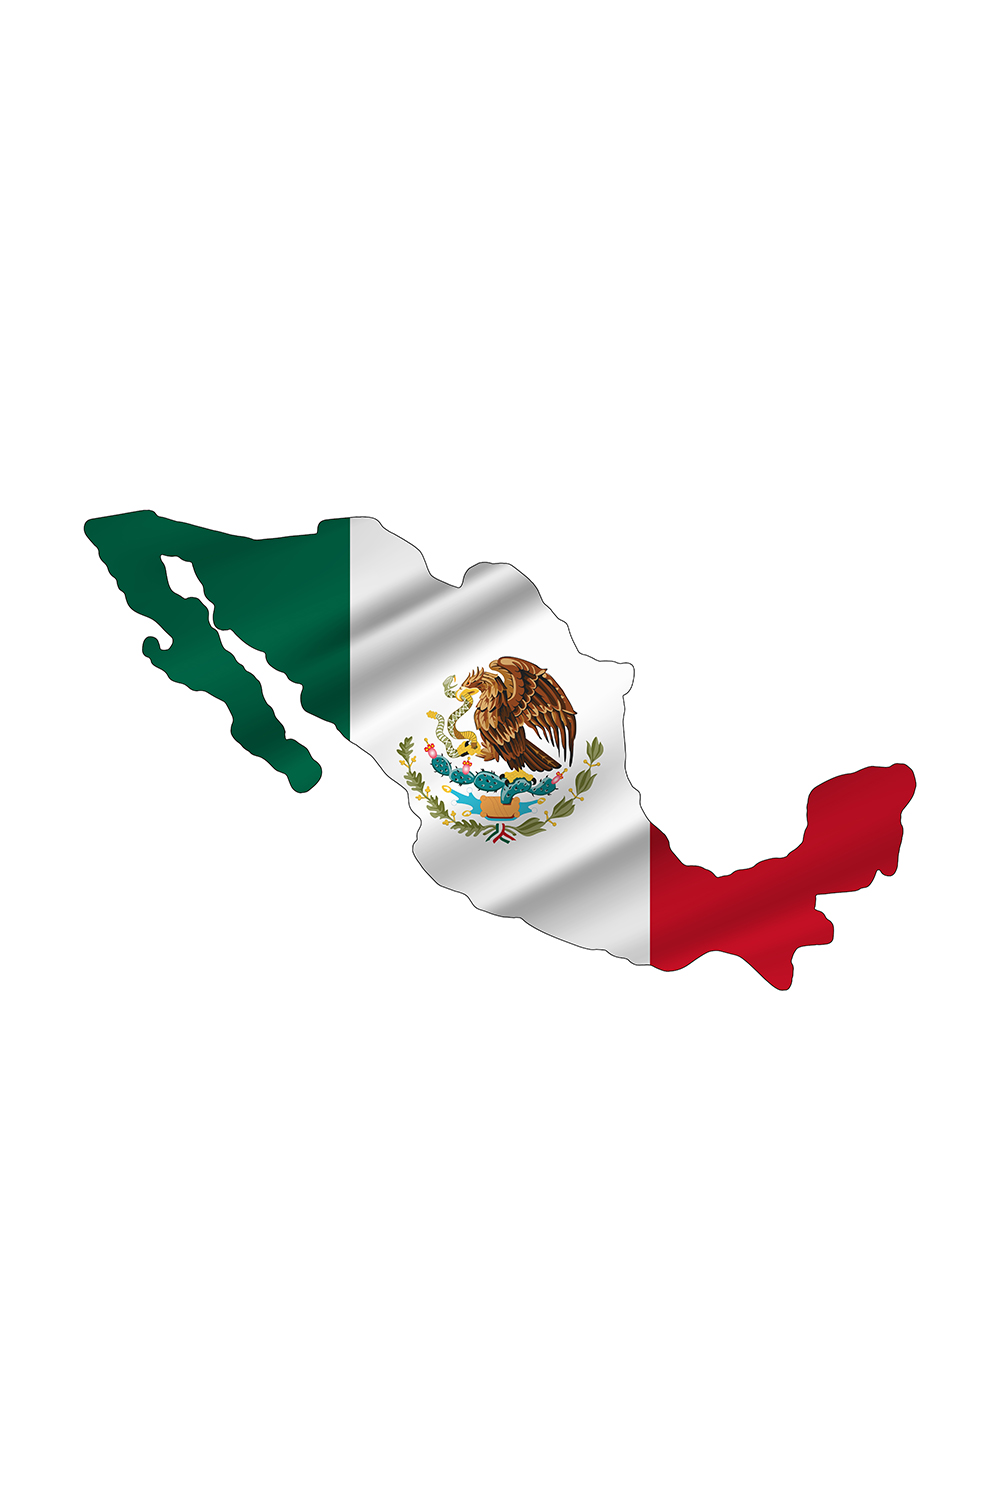 Mexico independence day pinterest preview image.